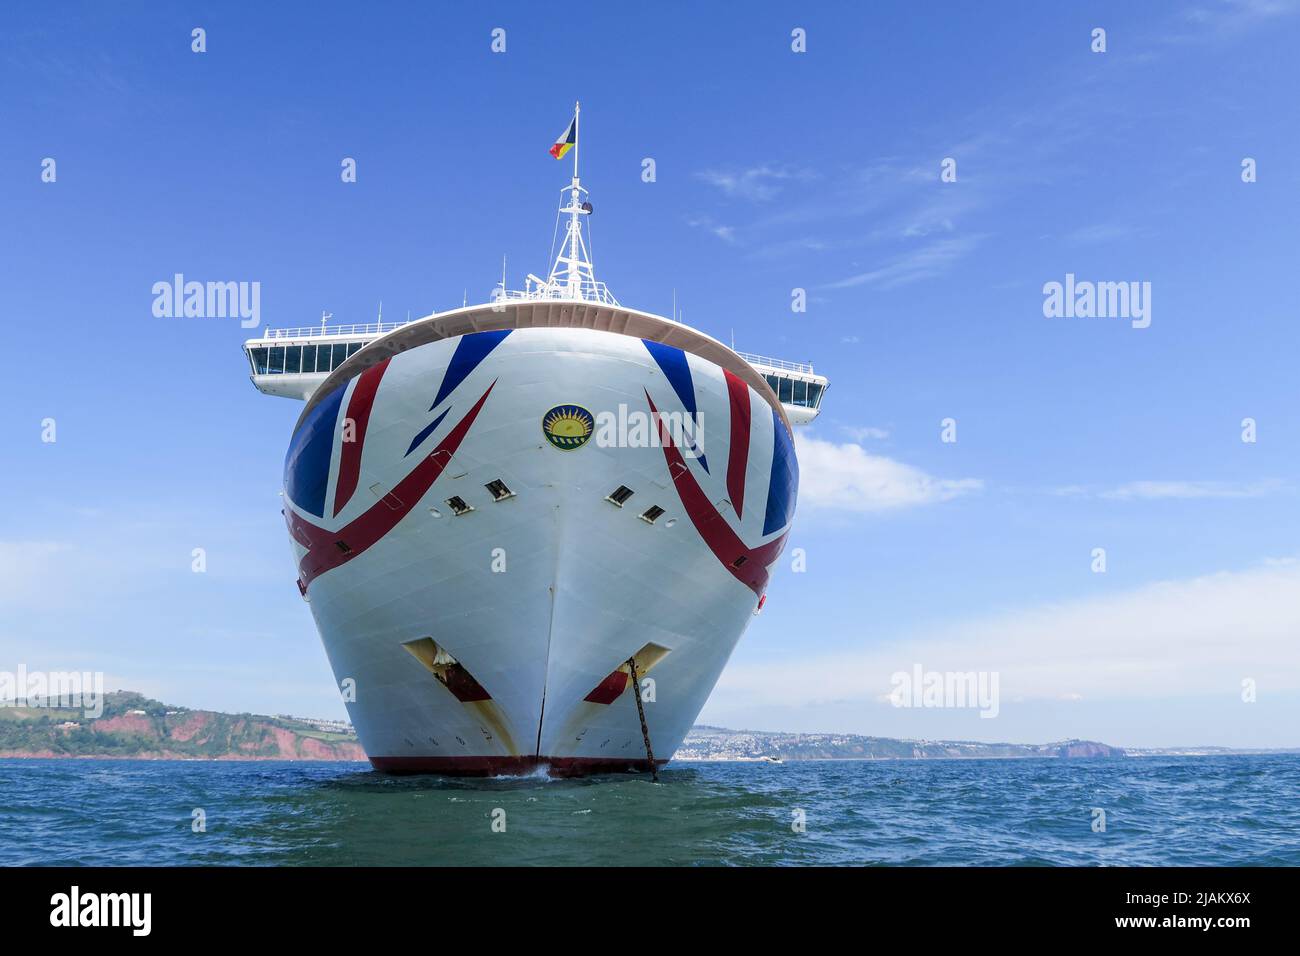 The 'Ventura' cruise liner moored in the bay outside of Teignmouth, Devon. Stock Photo